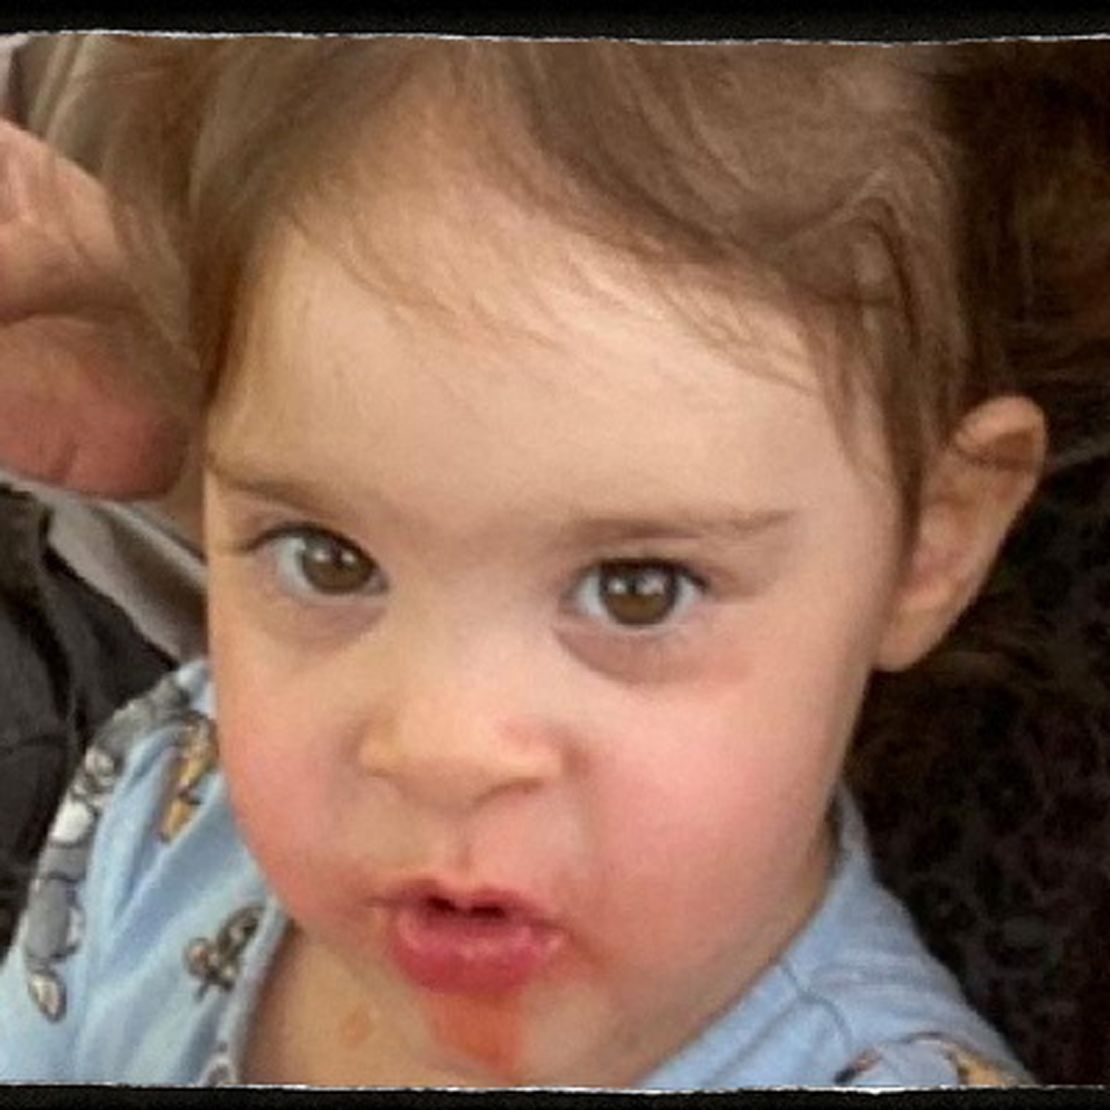 Emma Cunio. Age 3. Three-year-old Emma was released with her twin sister, Yuli, and mother, Sharon, on November 27. She is a "true kibbutz girl who prefers trucks and mechanical tools over dolls," according to the Hostages and Missing Families Forum.